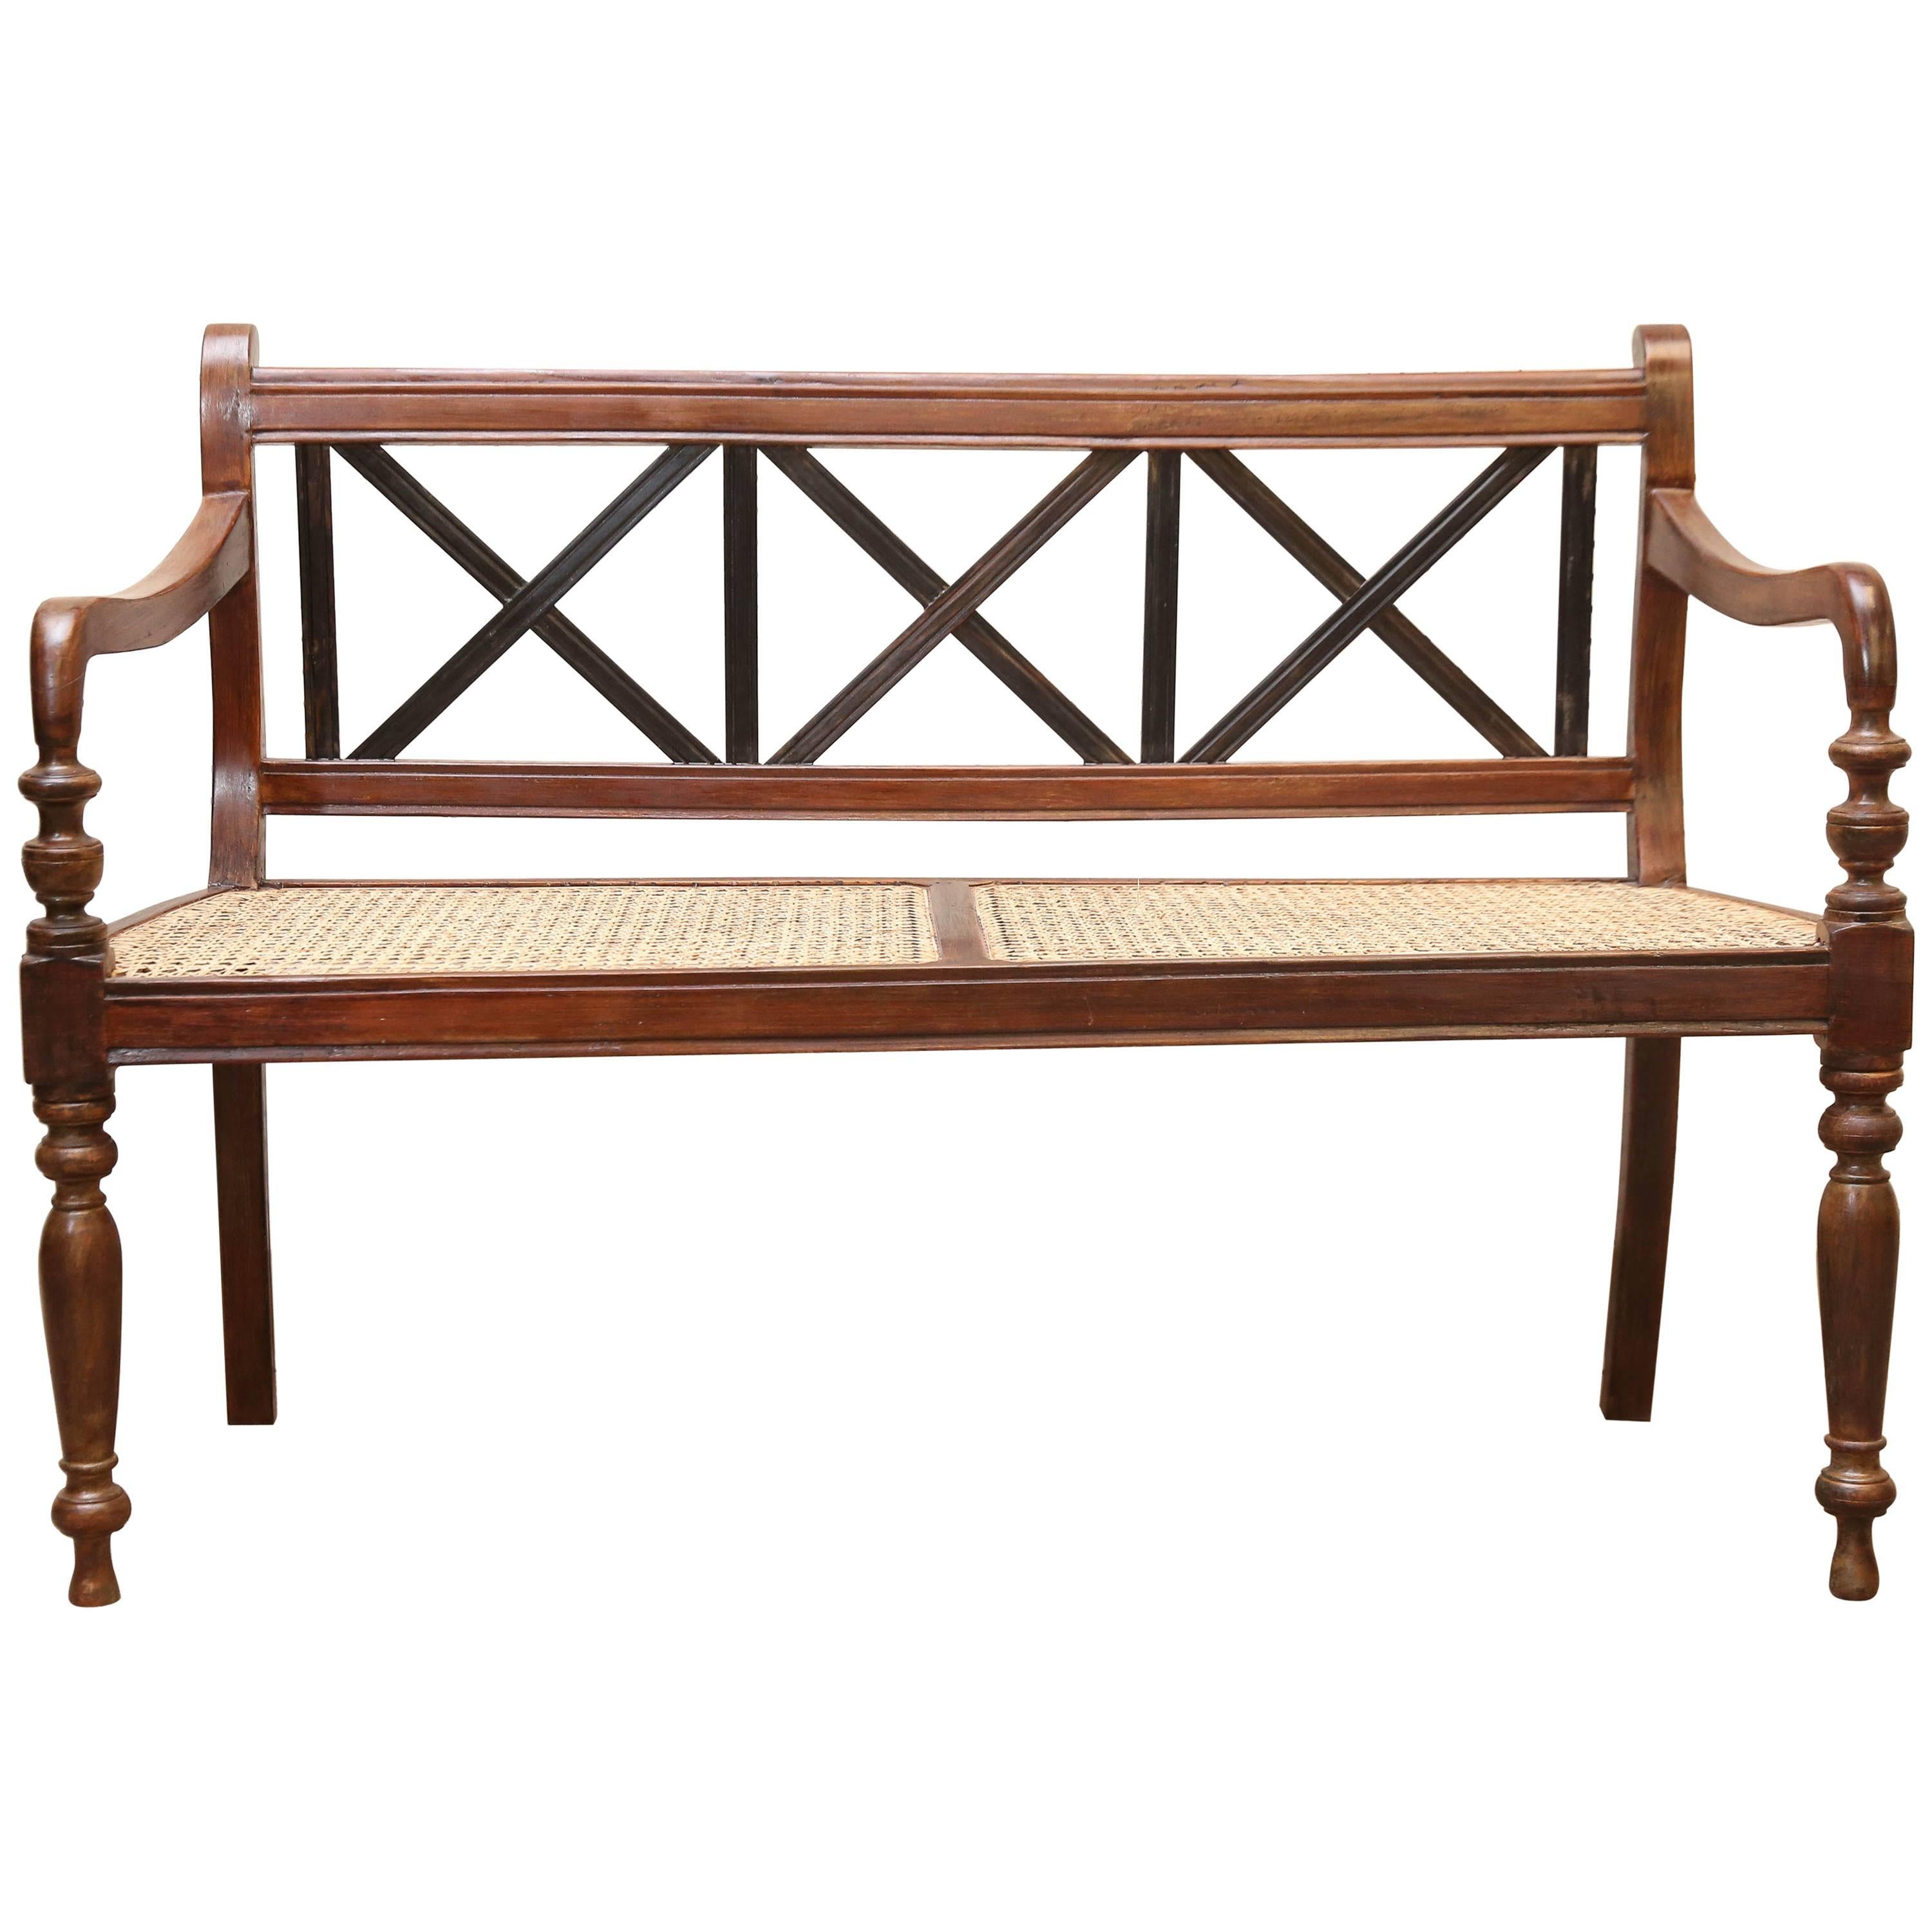 1920's Finely Crafted Dutch Colonial Teak Wood and Cane Bench from Sri Lanka